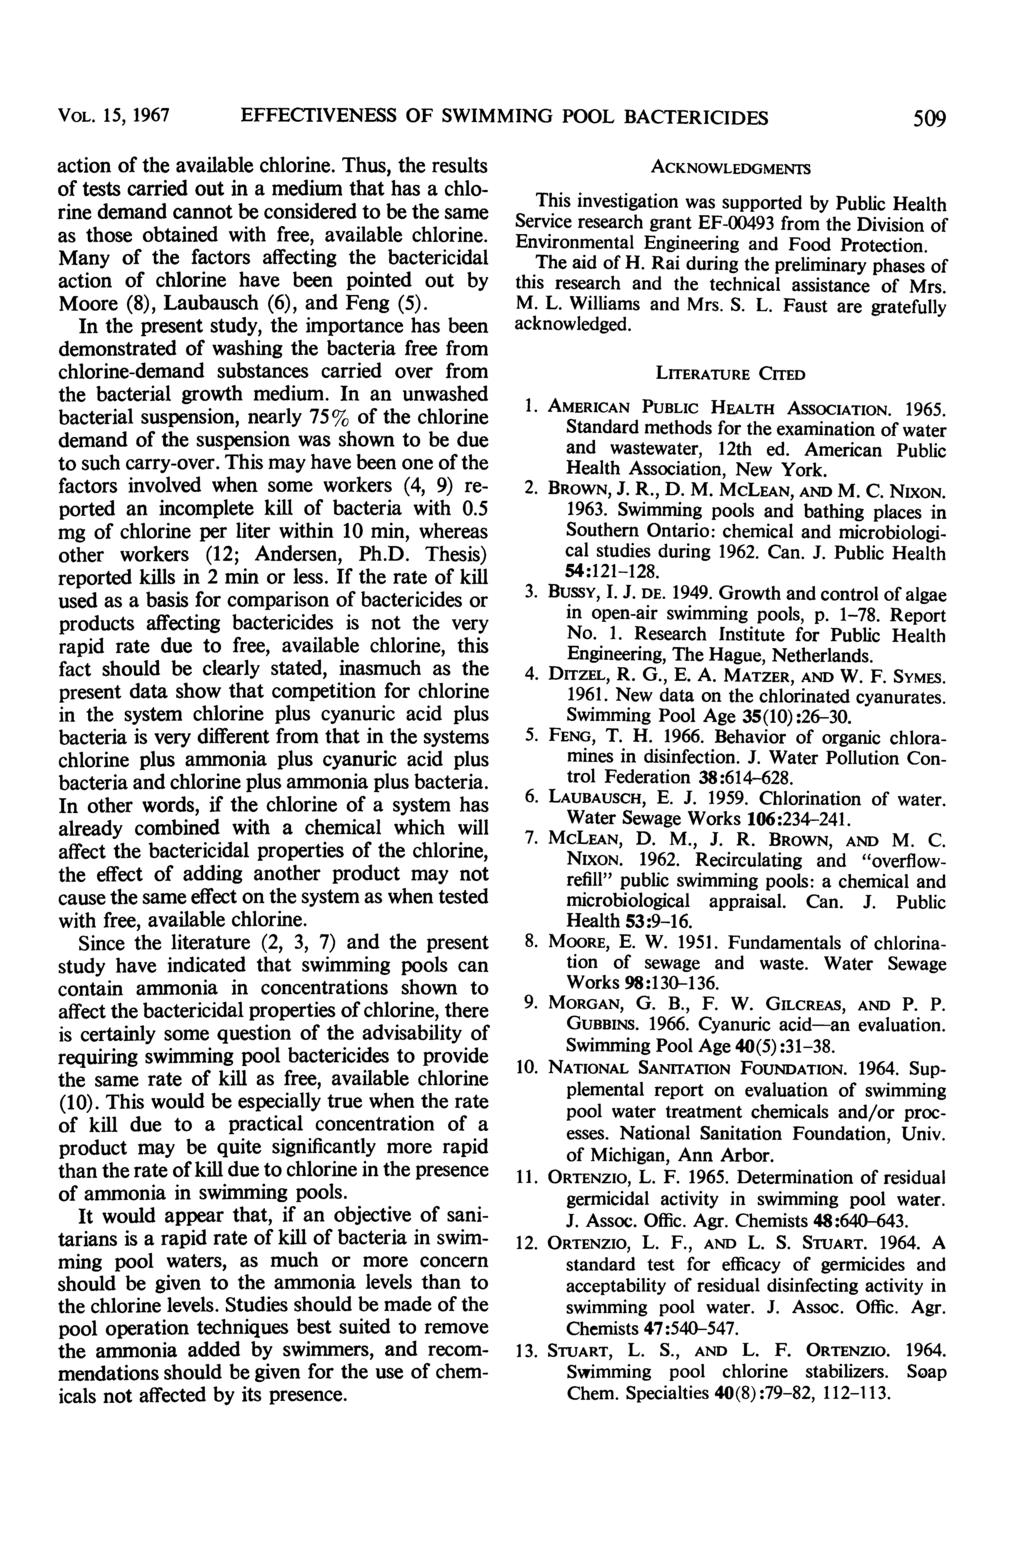 VOL. 15, 1967 EFFECTIVENESS OF SWIMMING POOL BACTERICIDES 59 action of the available chlorine.